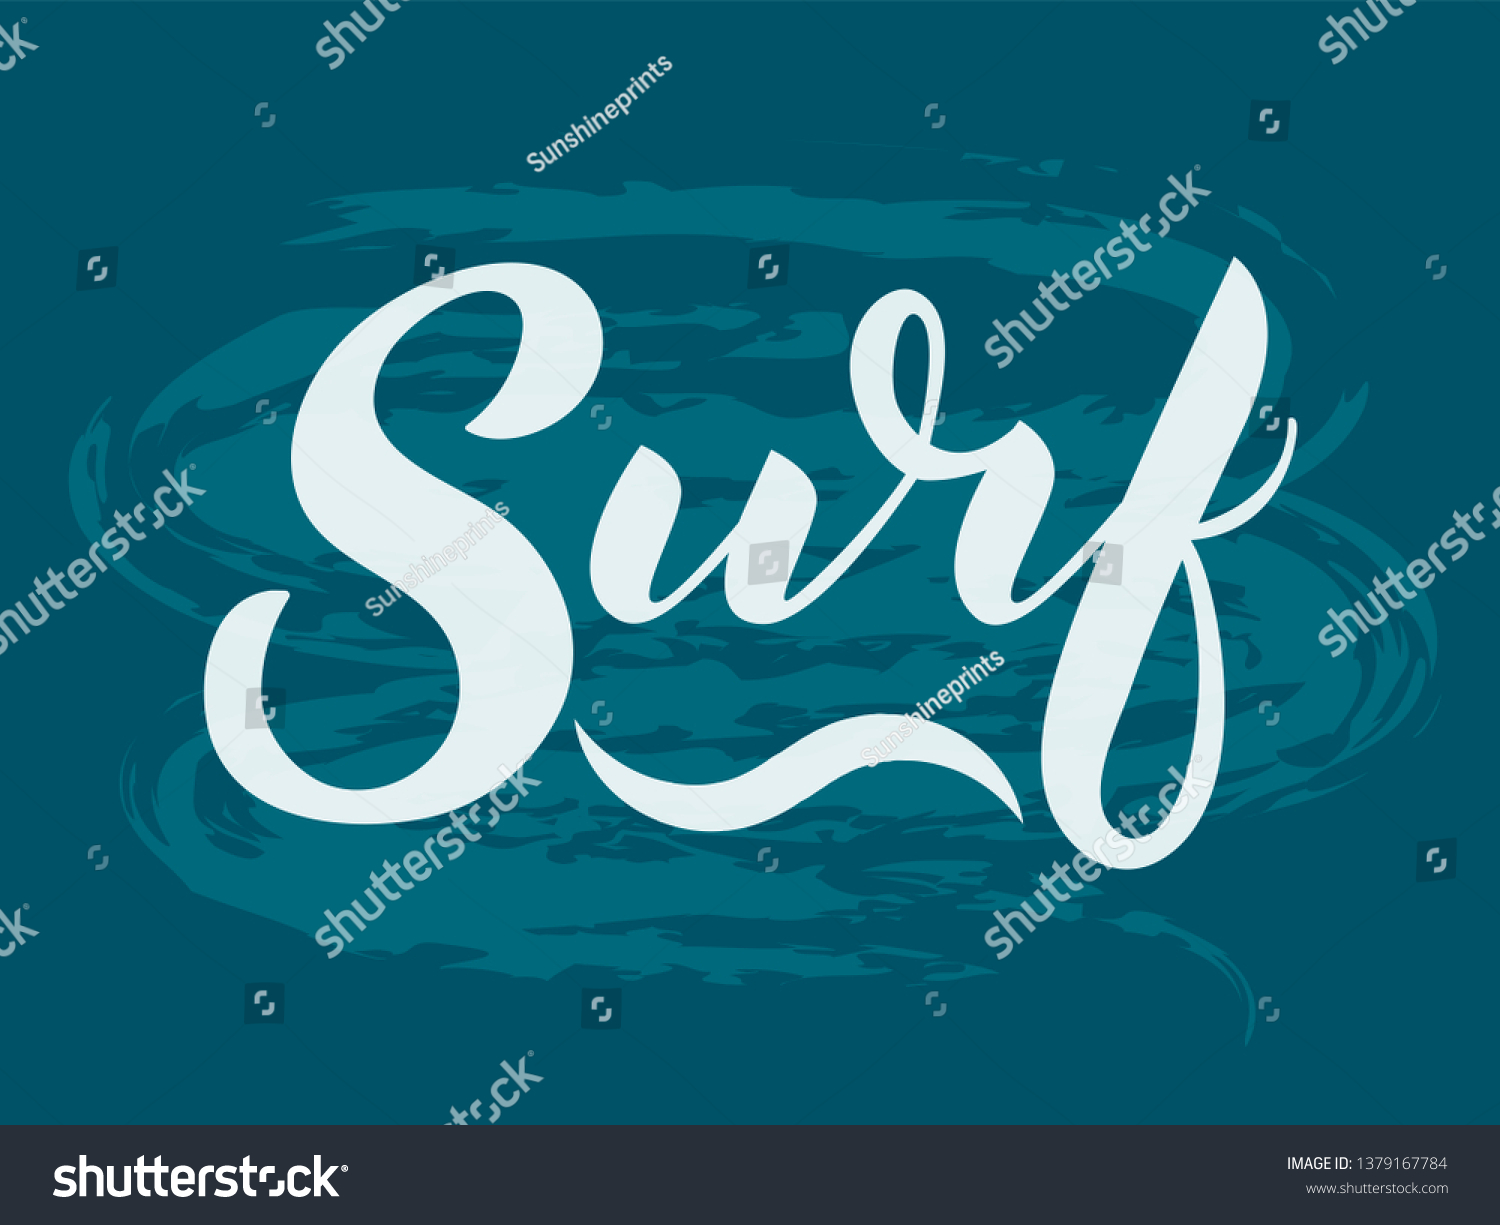 Hand Written Vector Surf Text Cool Stock Vector (Royalty Free ...